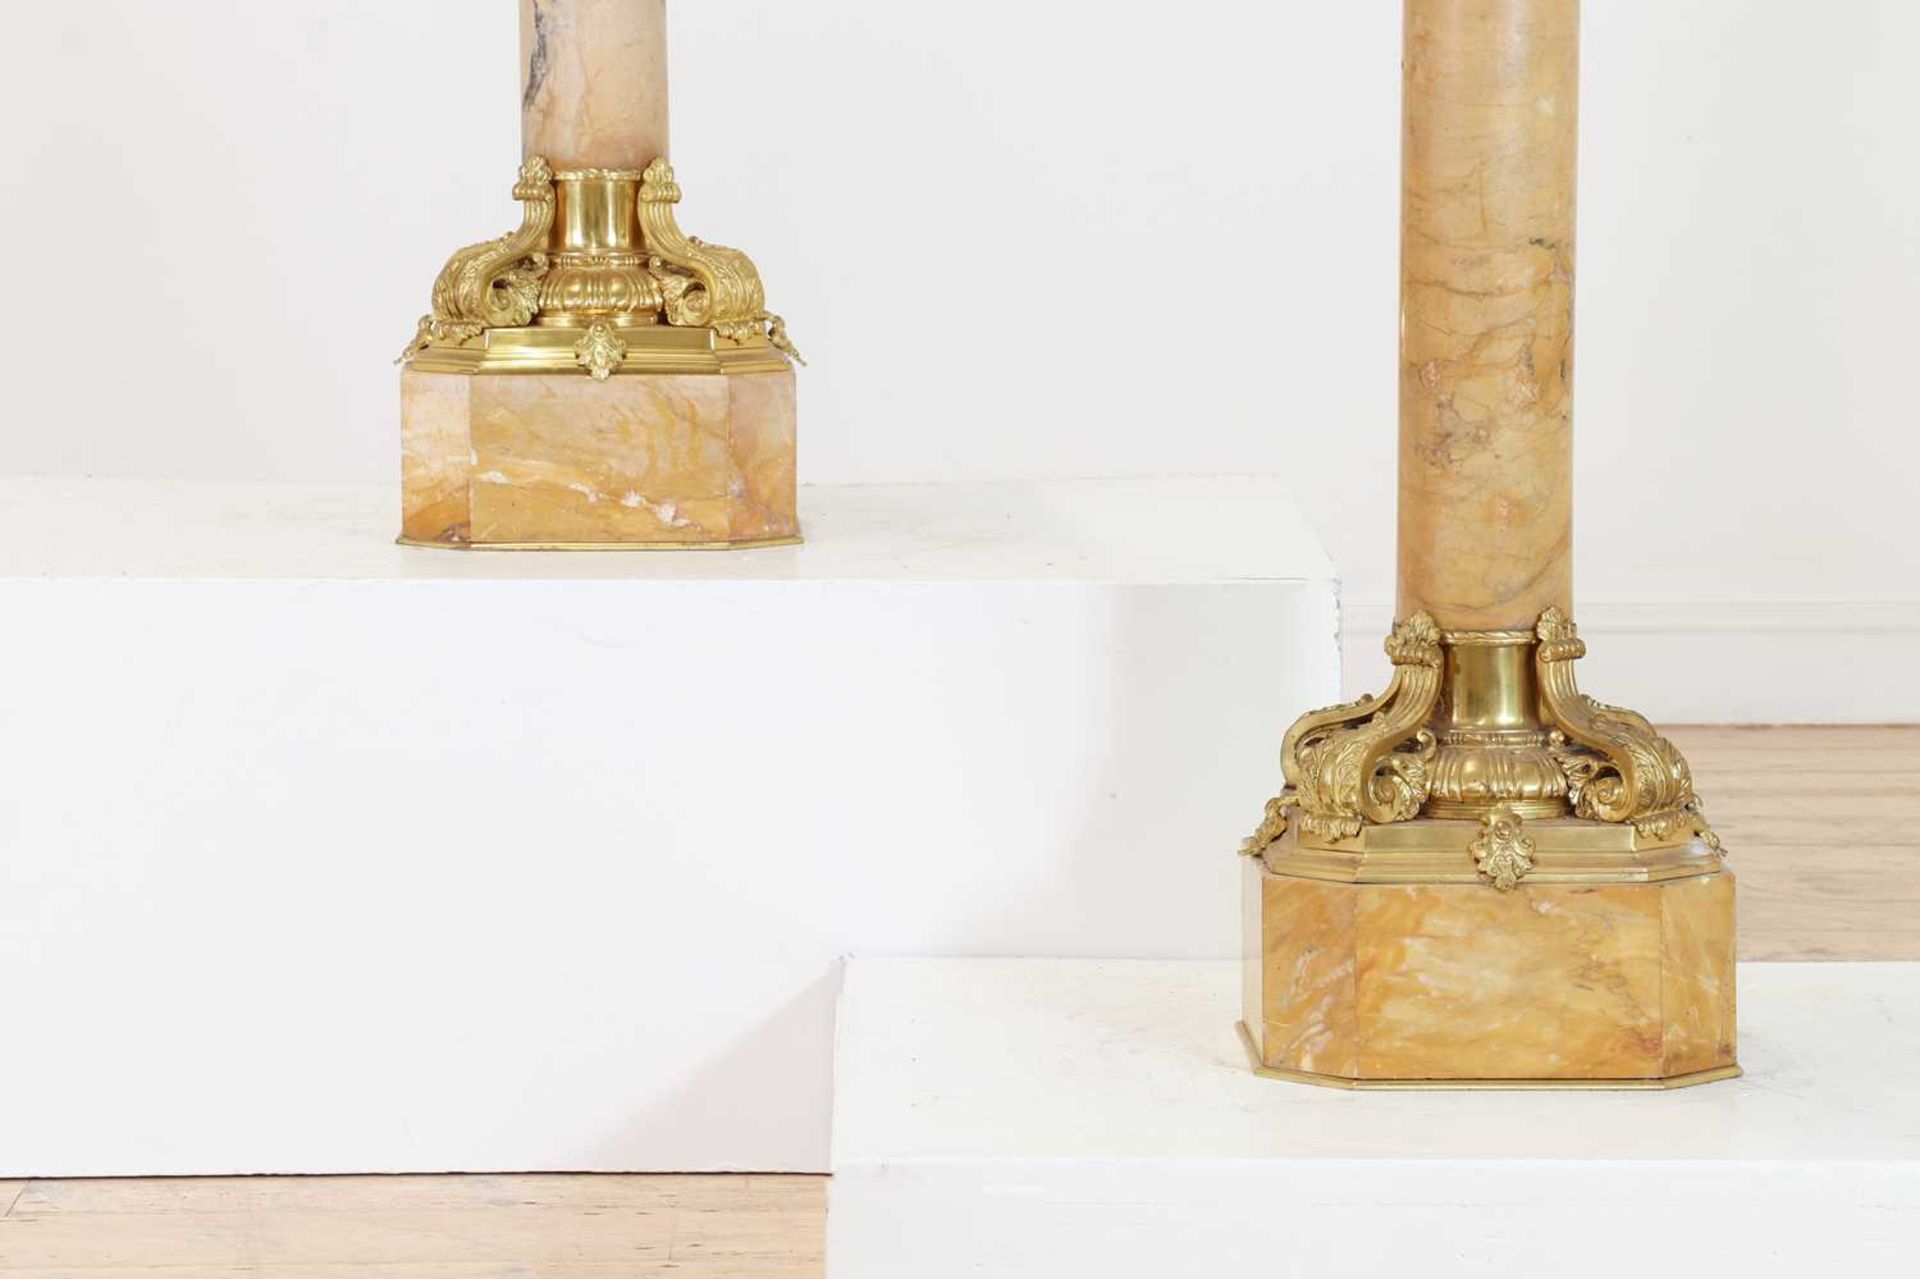 A pair of giallo antico marble pedestals, - Image 3 of 9